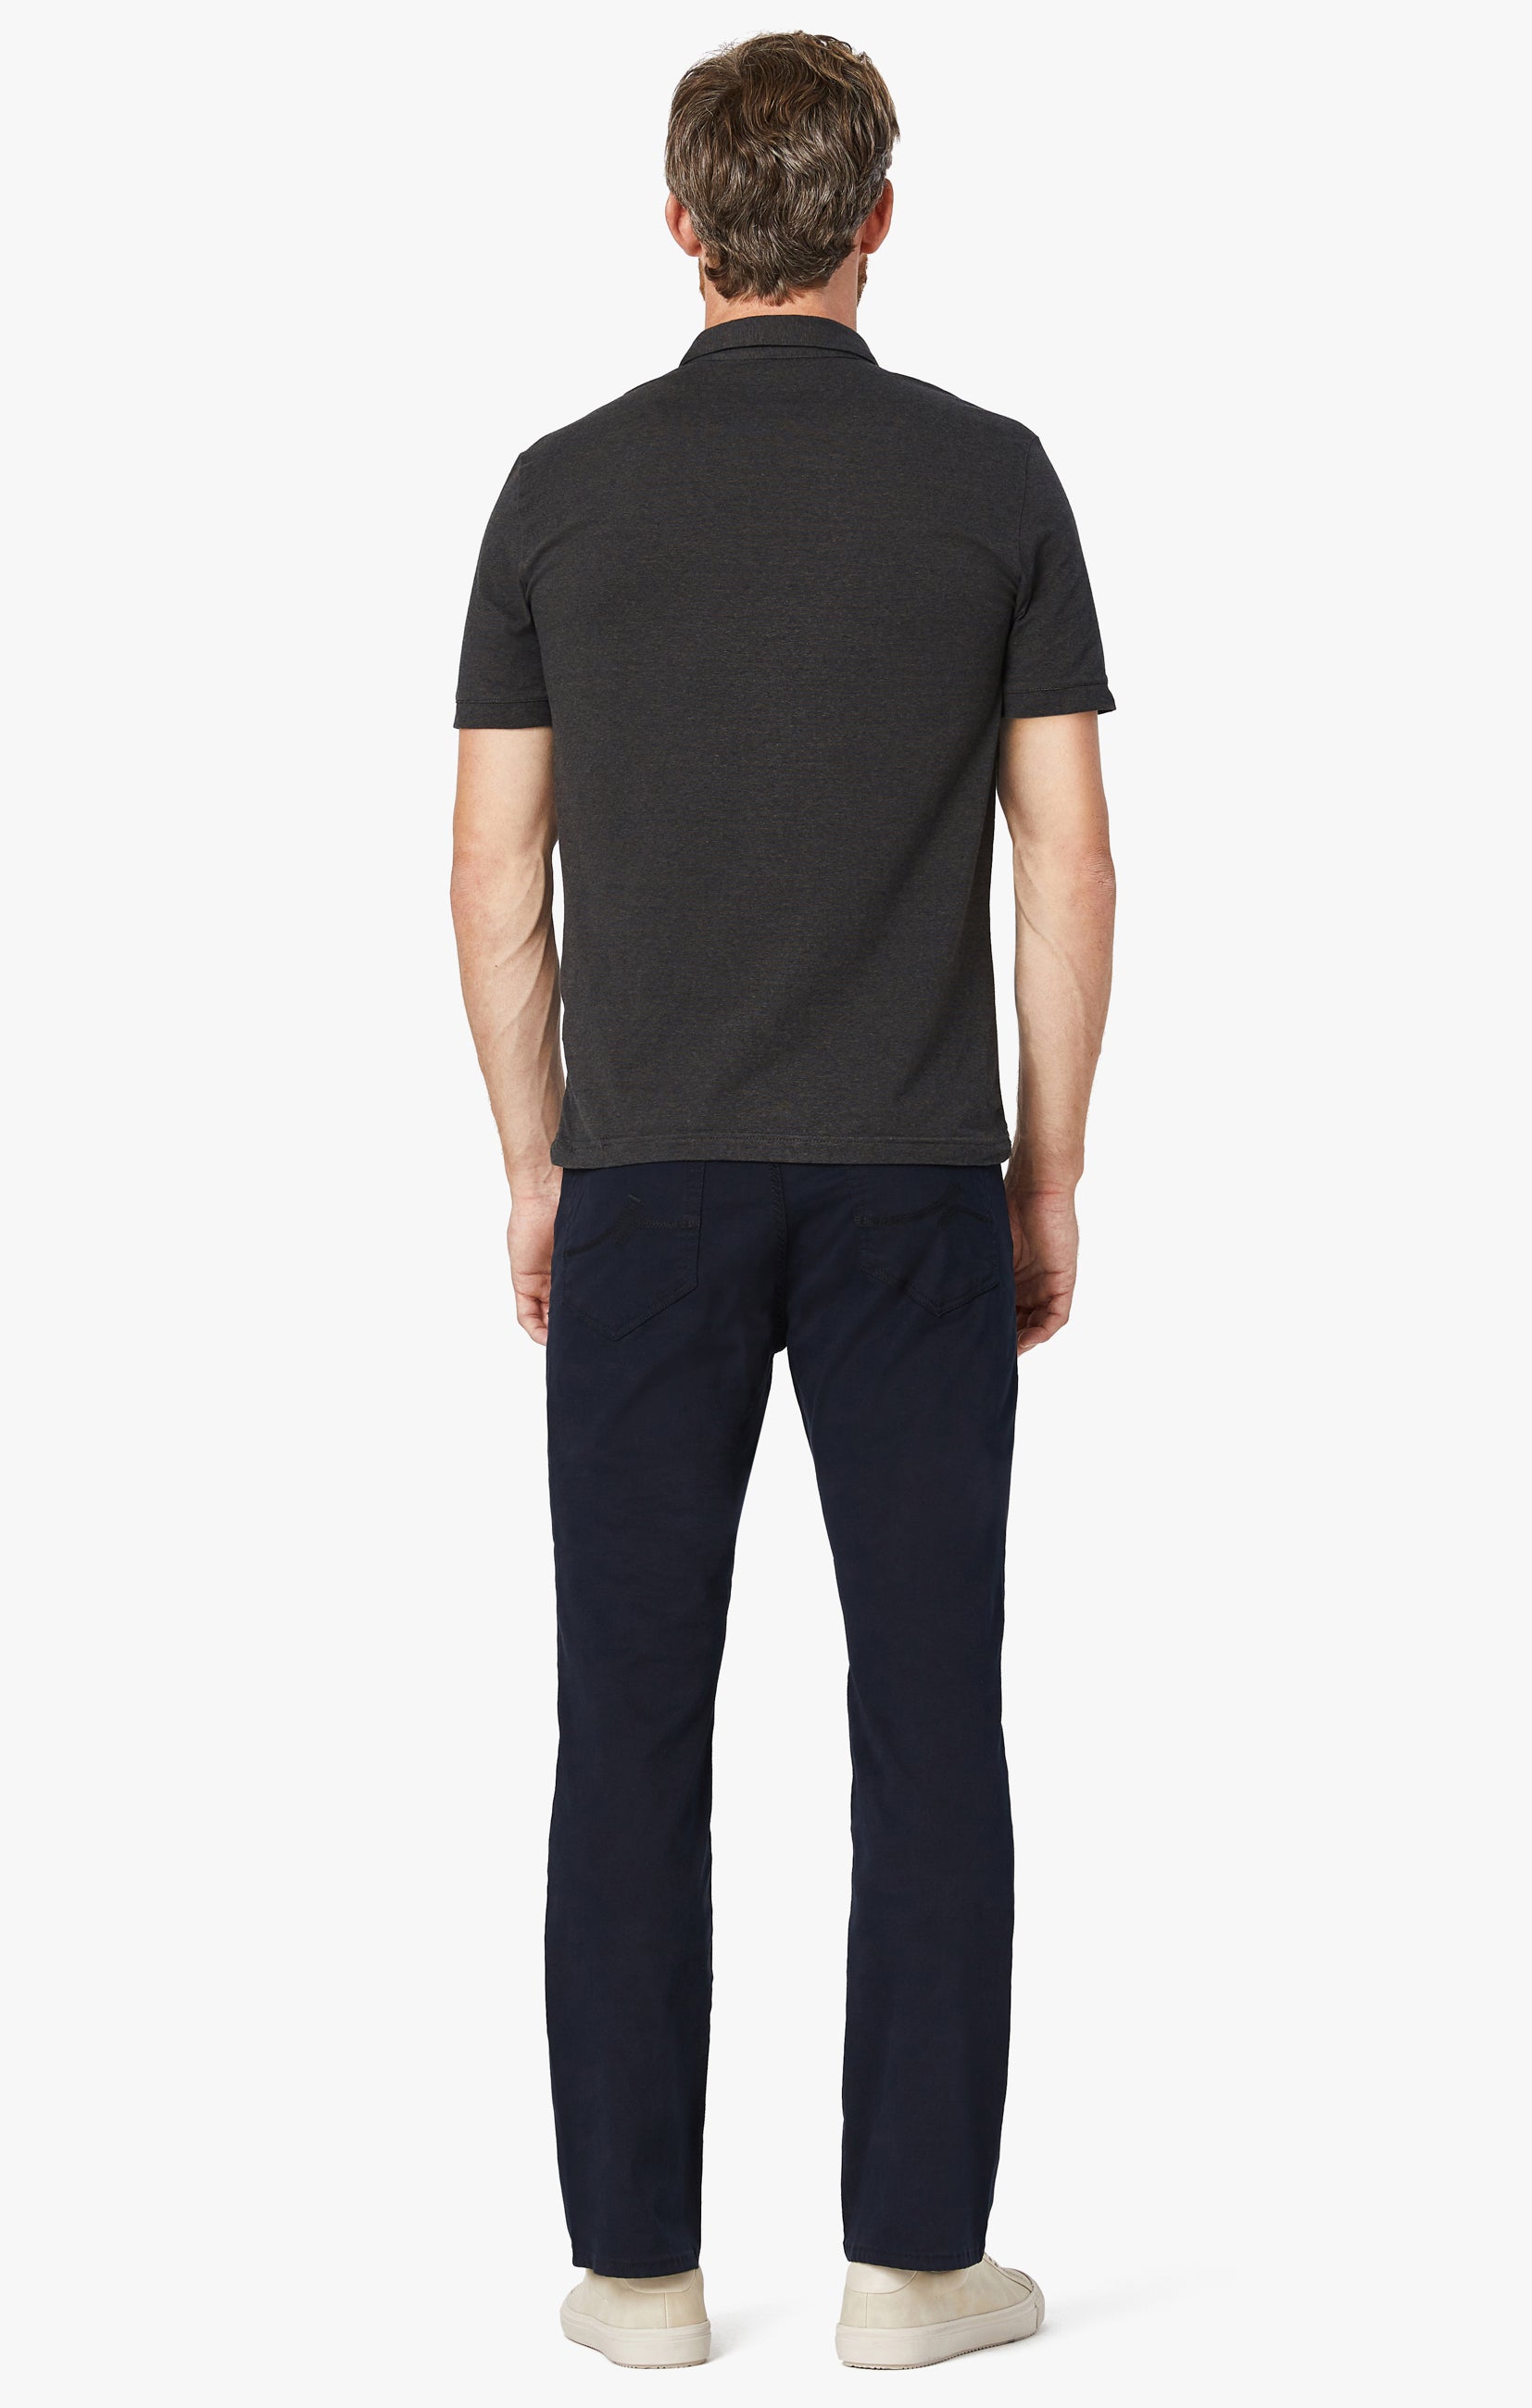 Charisma Relaxed Straight Pants in Navy Twill Image 9